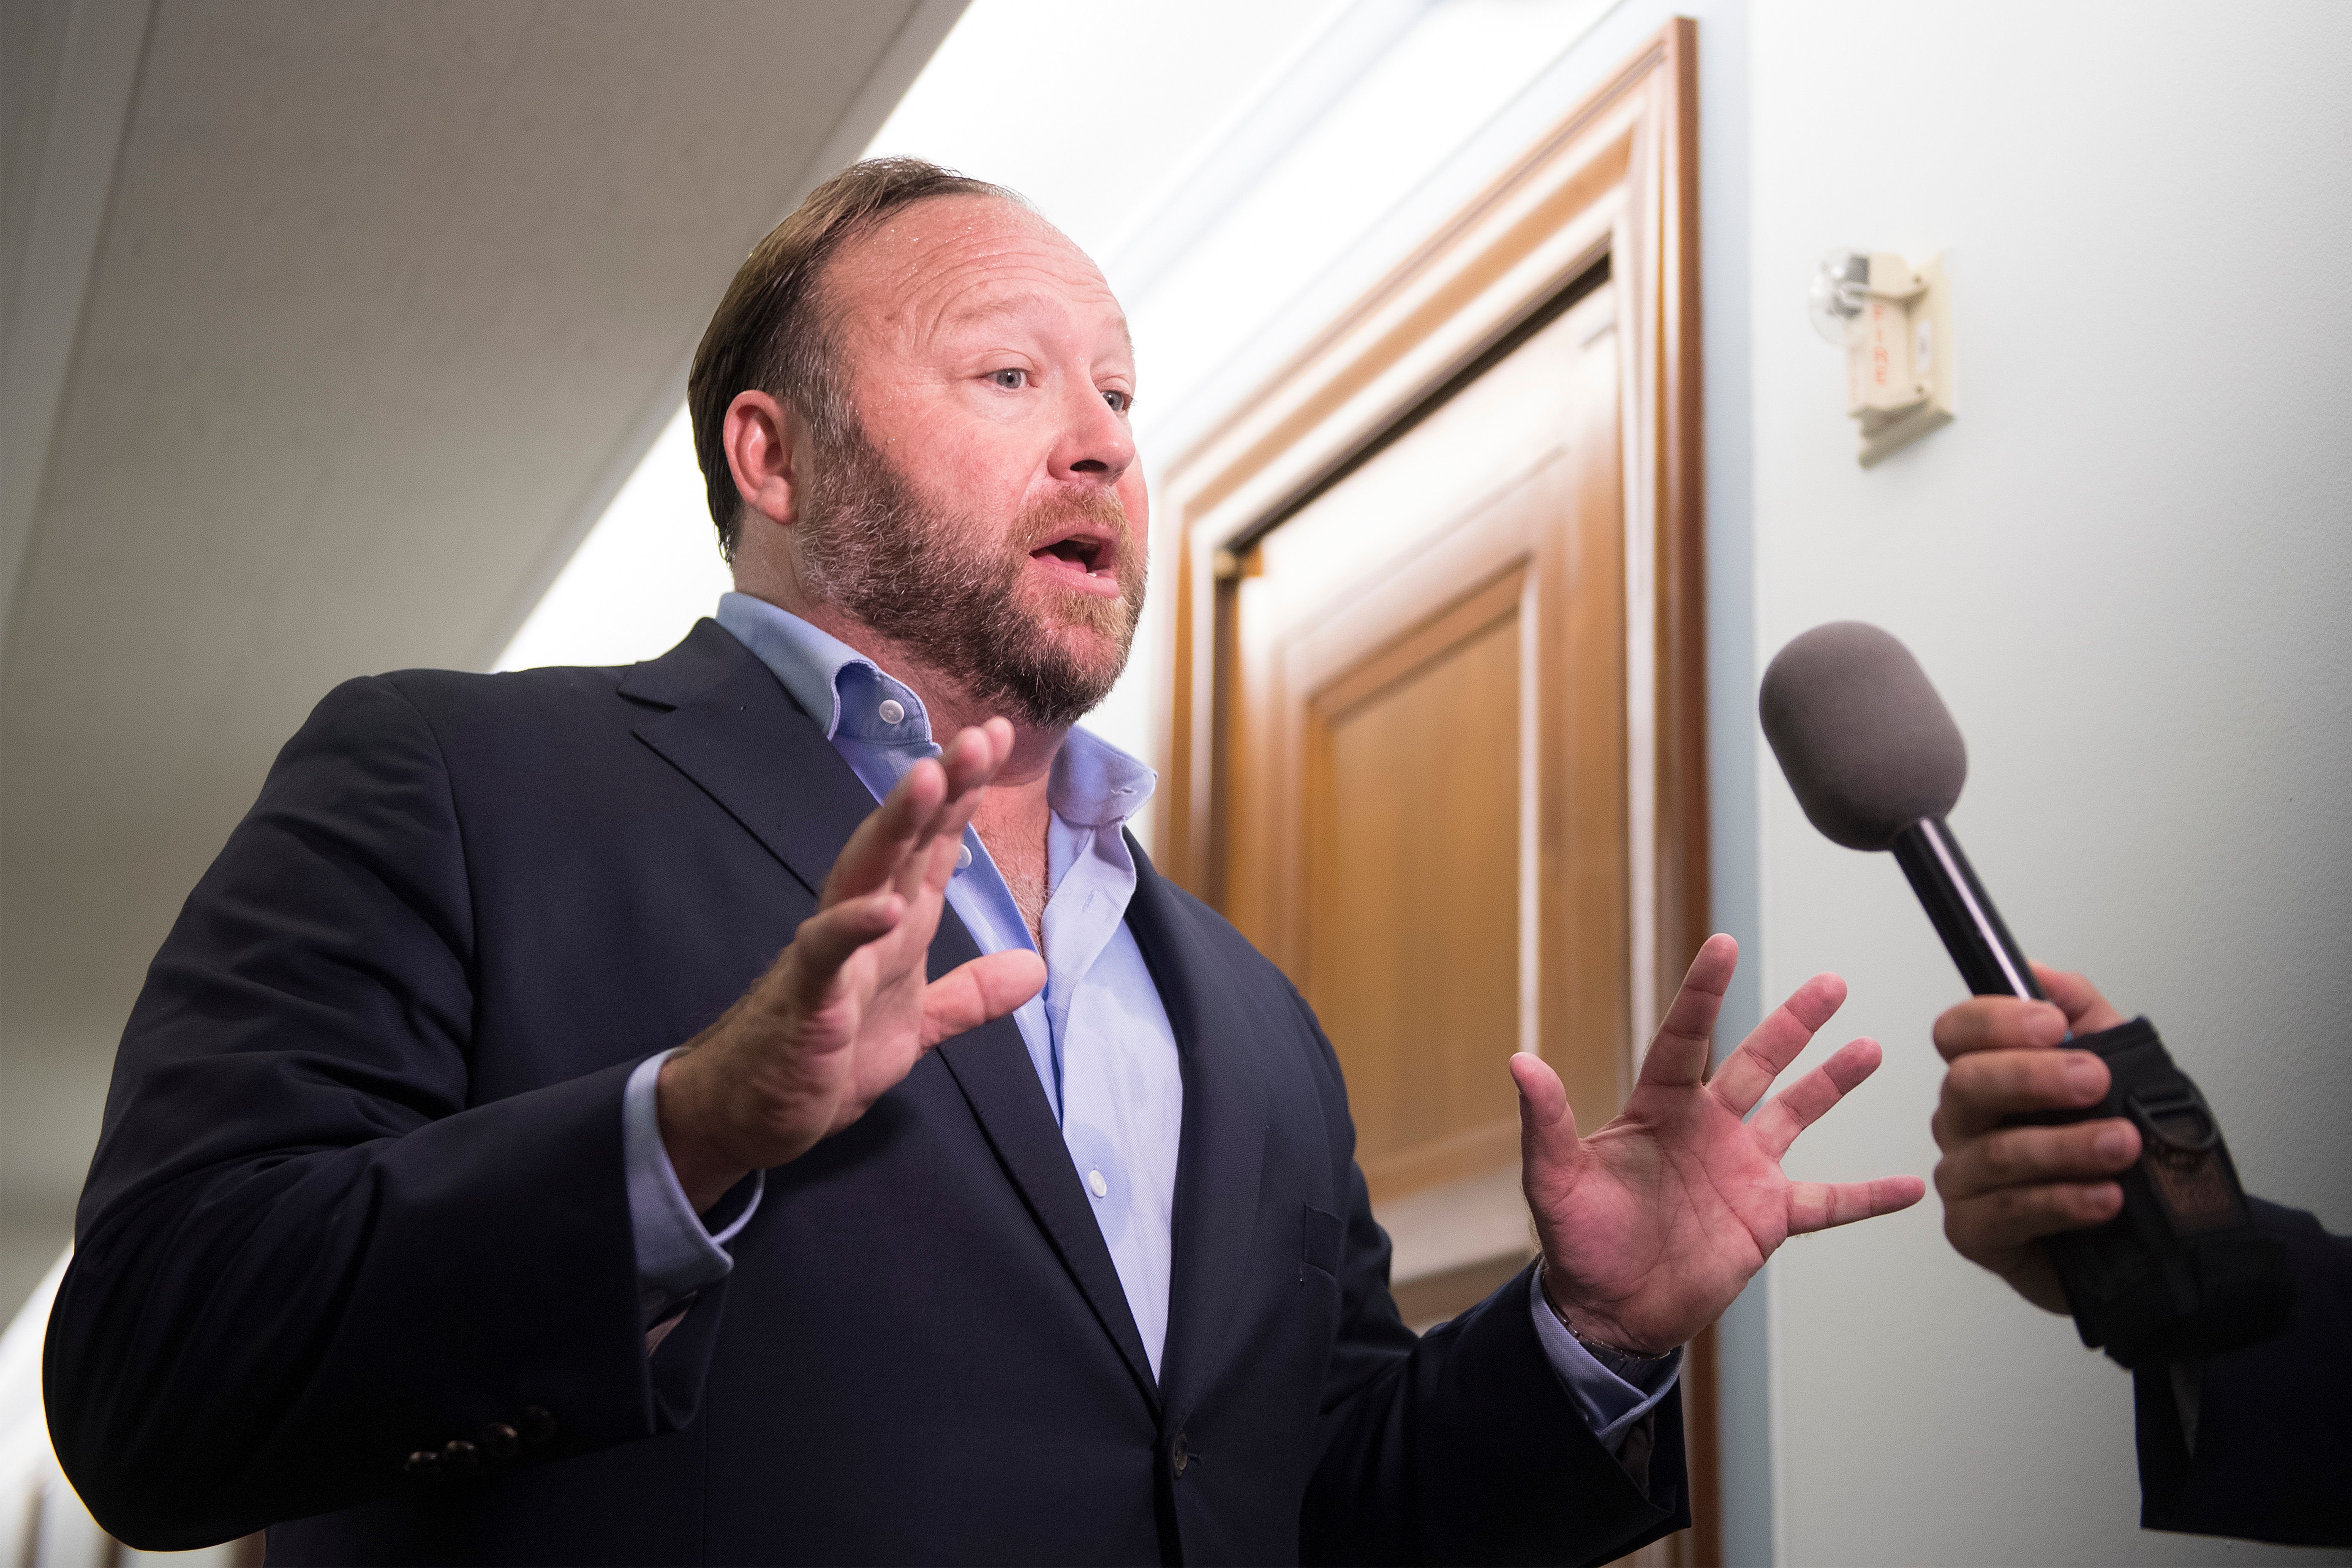 Alex Jones speaks with reporters outside as Twitter CEO Jack Dorsey and Facebook COO Sheryl Sandberg testify before the Senate Intelligence Committee. (JIM WATSON/AFP via Getty Images)